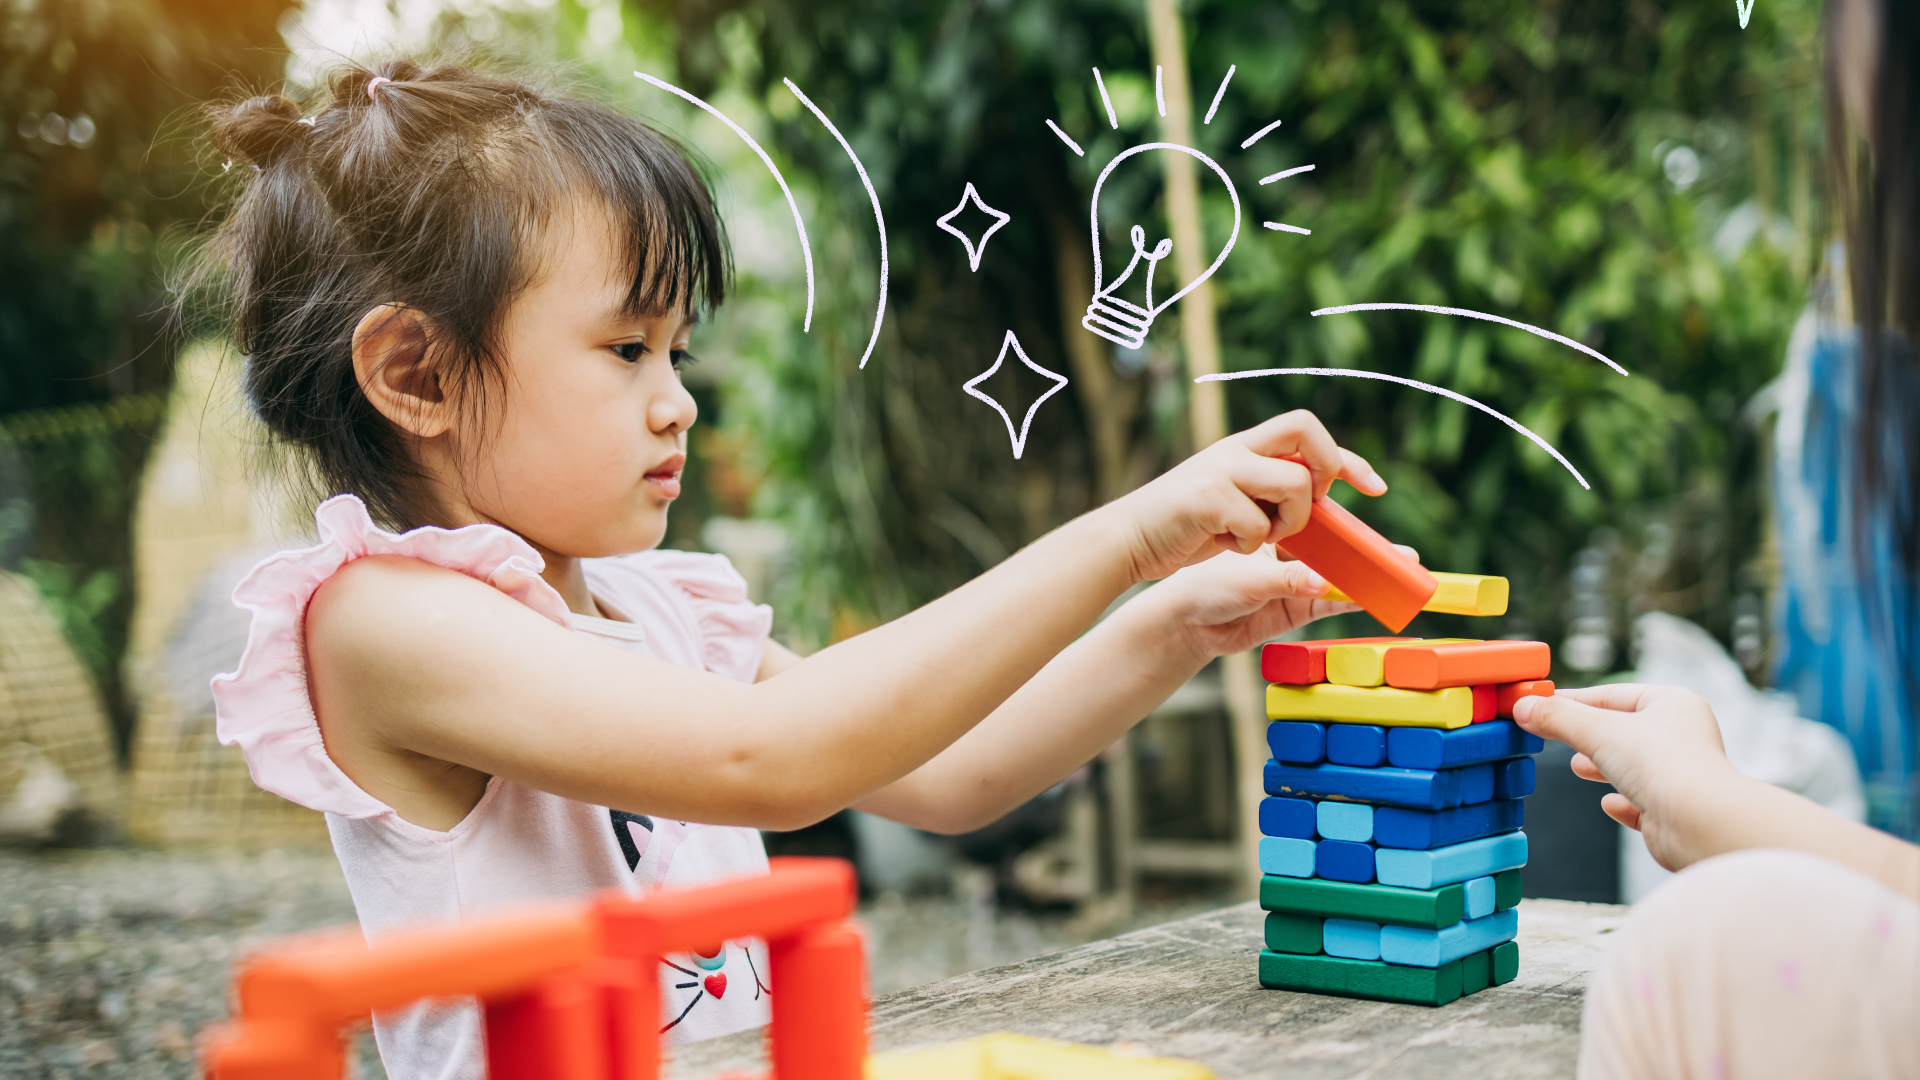 15 Games for Toddlers that Encourage Creative Thinking, clicking games for  toddlers 